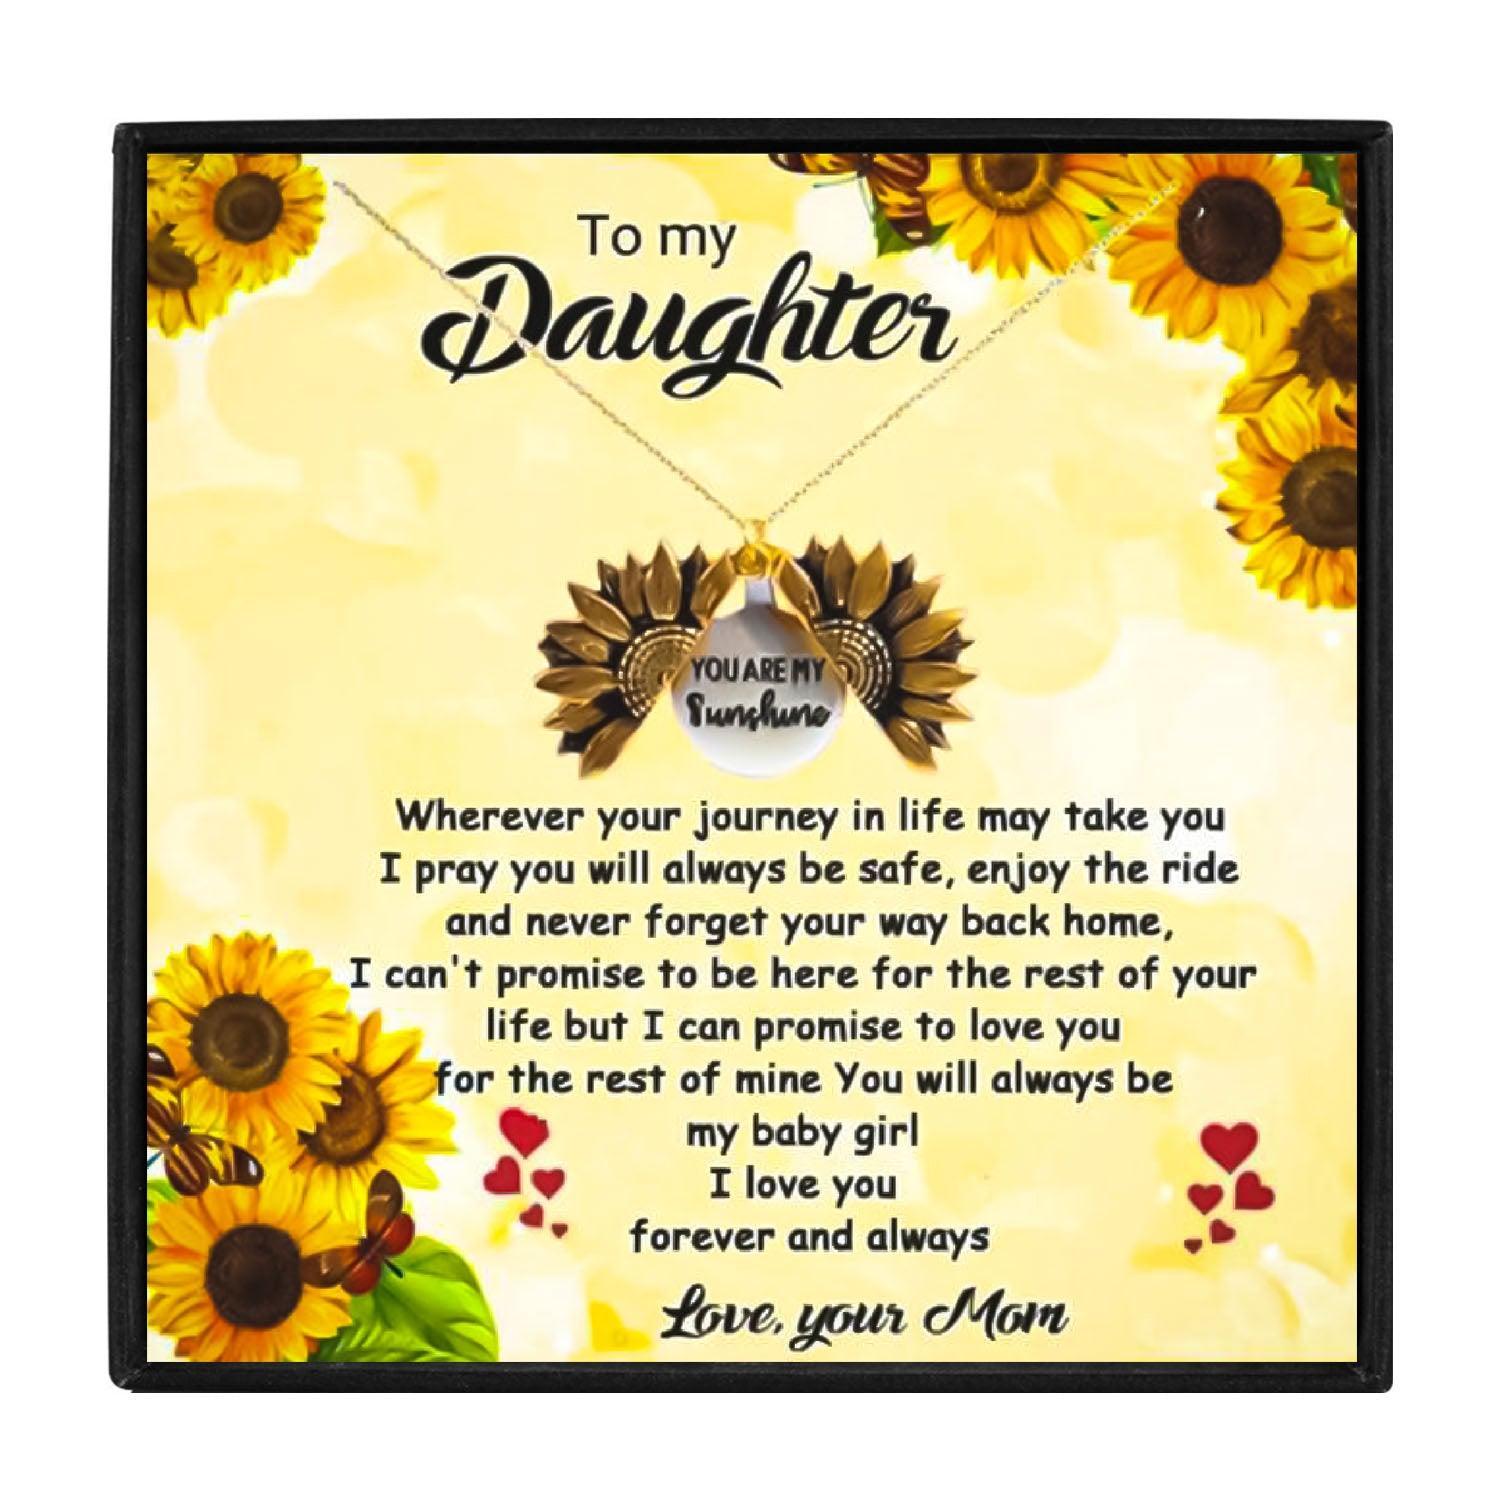 To My Daughter You Are My Sunshine Sunflower Necklace for Christmas 2023 | To My Daughter You Are My Sunshine Sunflower Necklace - undefined | daughter gift, daughter necklaces, Sunflower Necklace, Sunflower Necklaces, To My Daughter, To my daughter necklace from mom | From Hunny Life | hunnylife.com